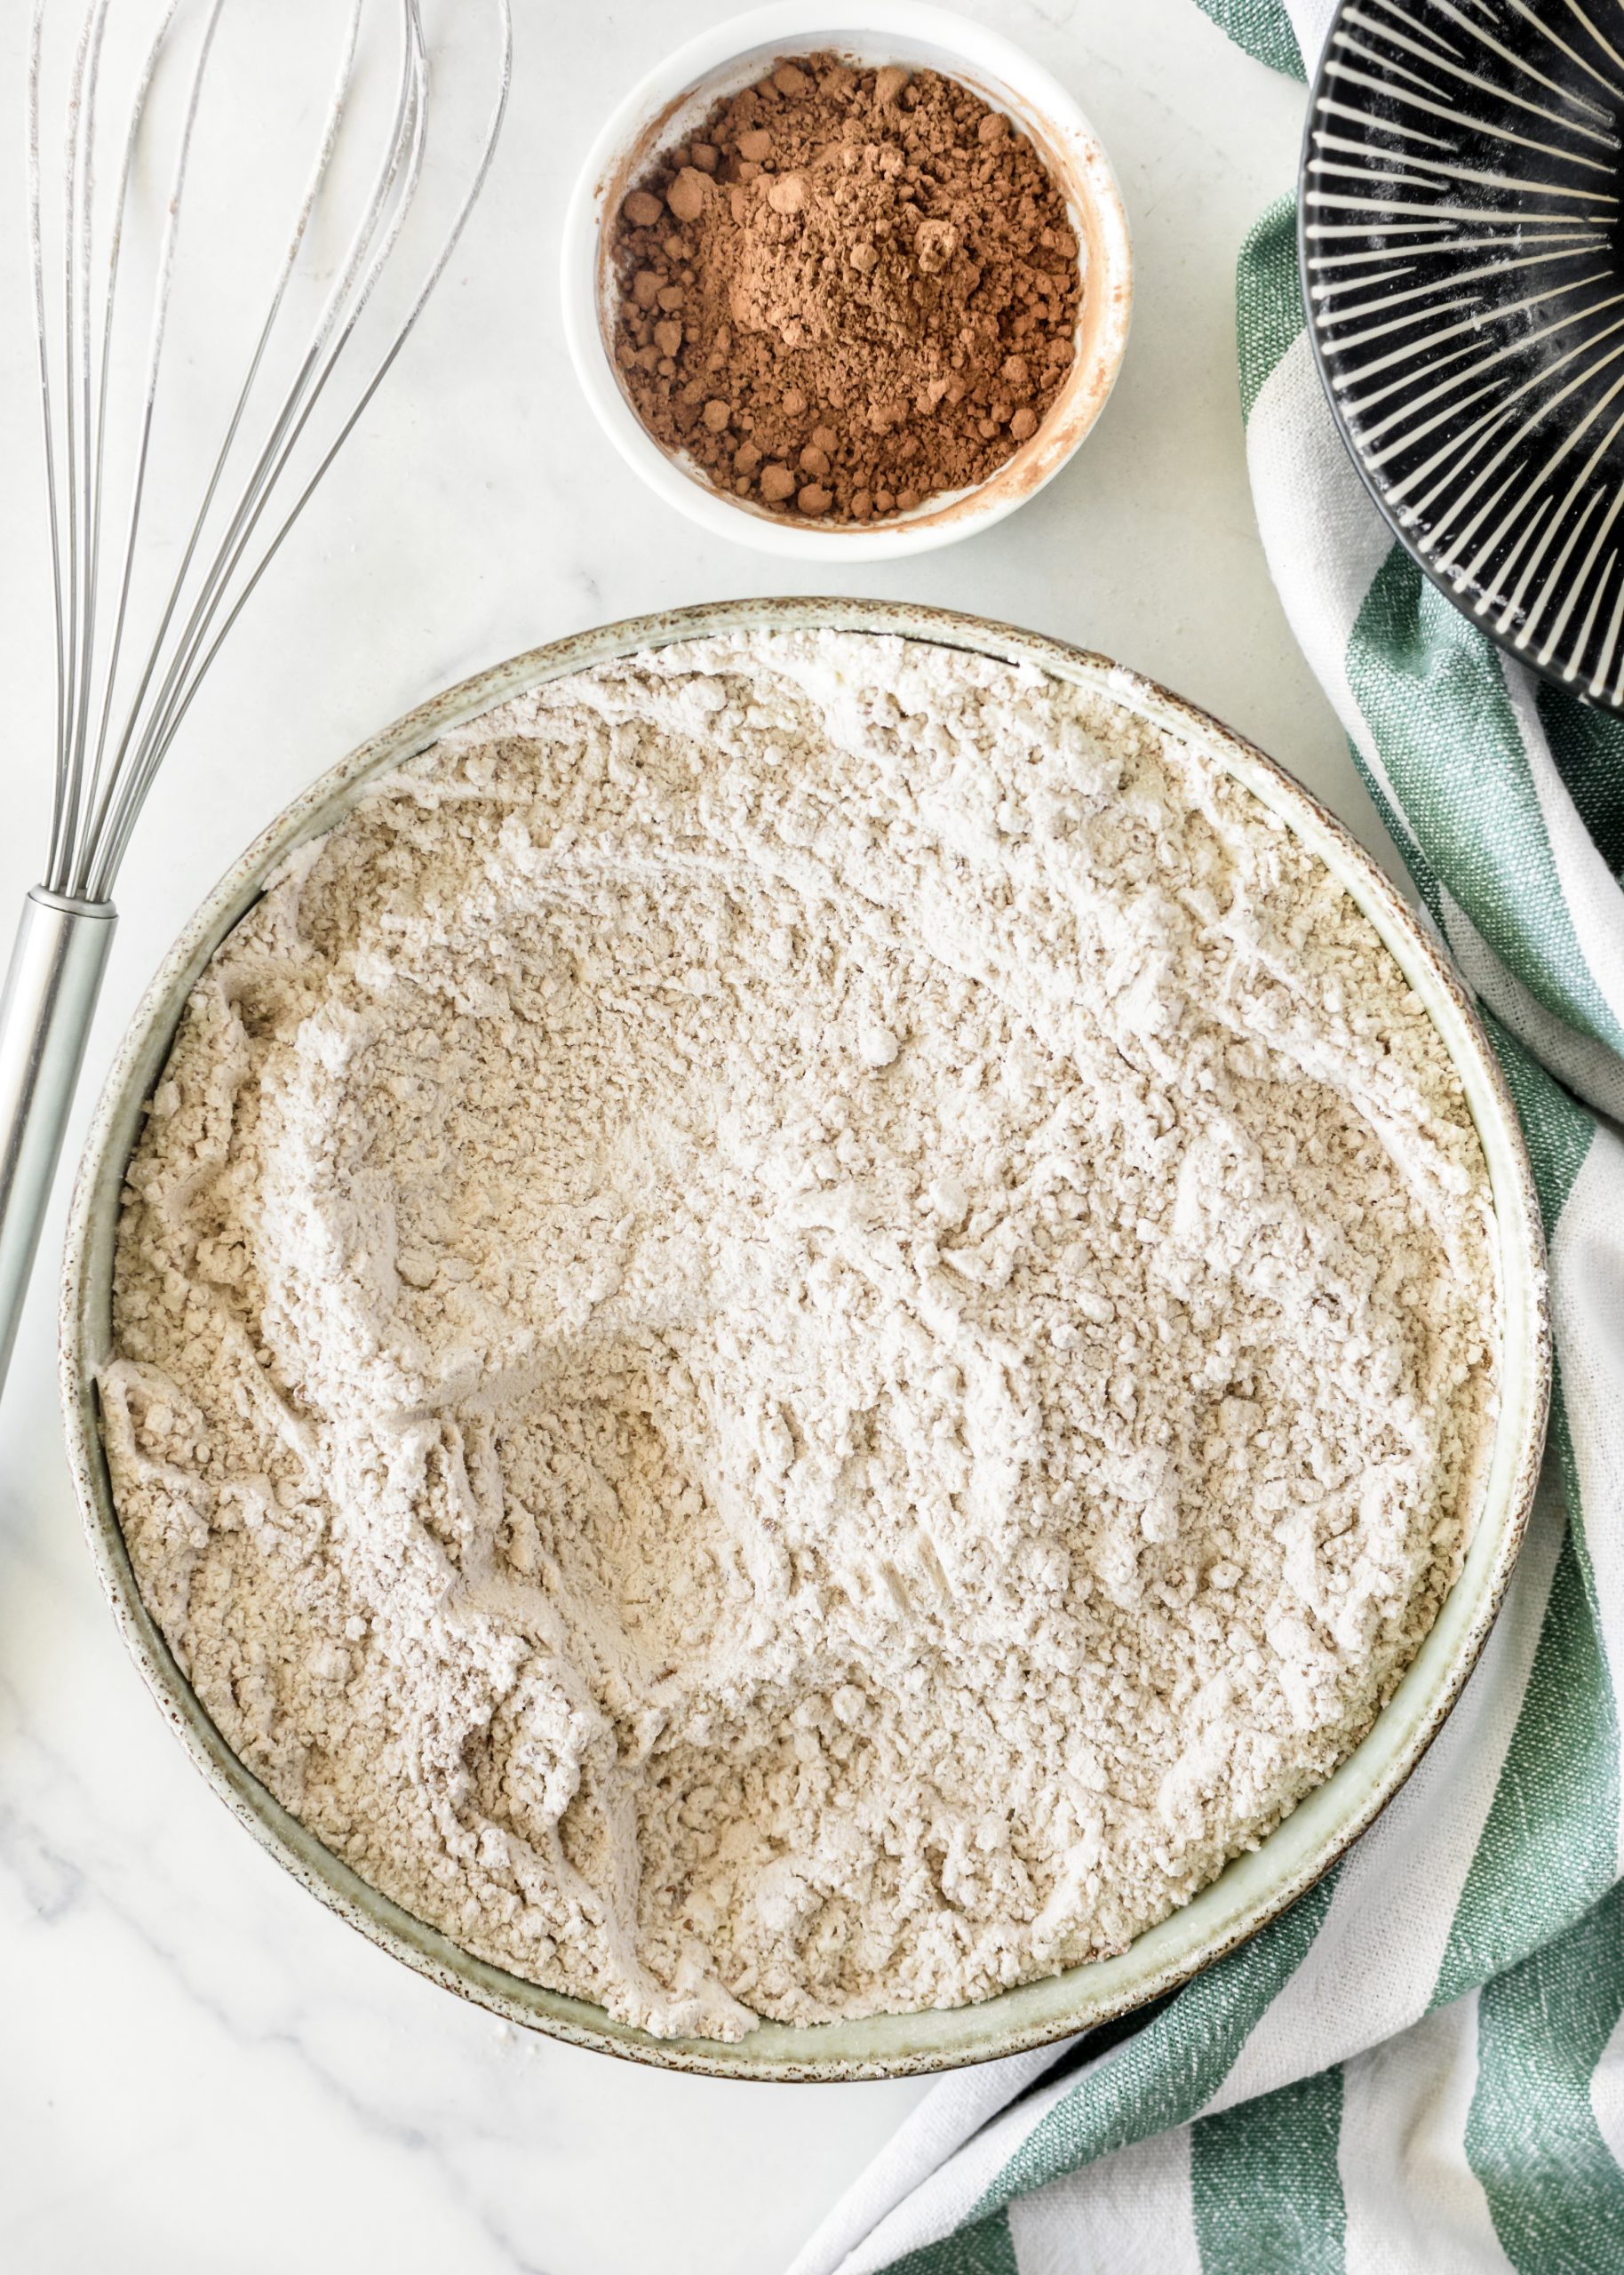 Blend together the flour, baking soda, cocoa powder, and salt in a mixing bowl. 